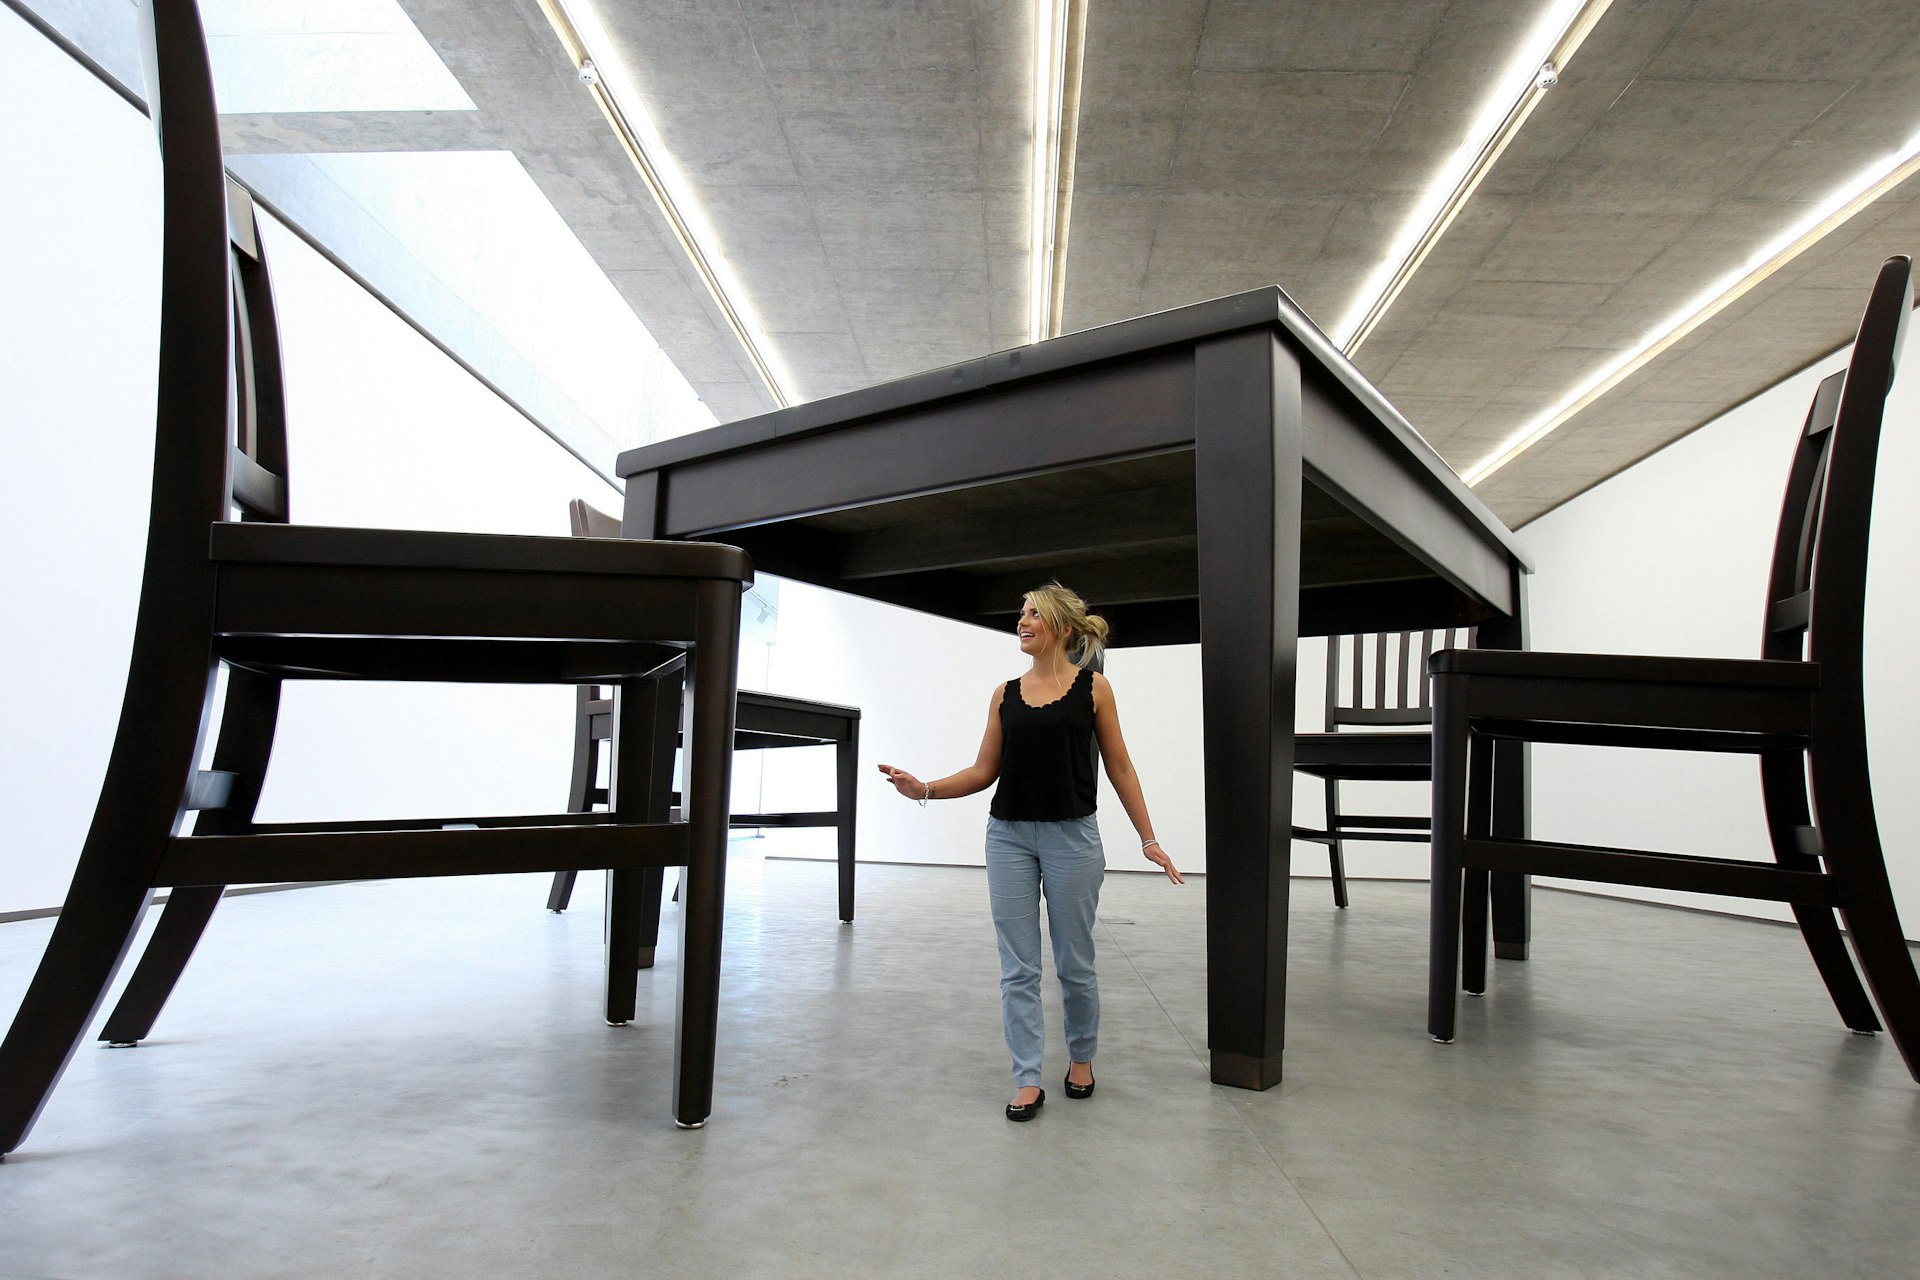 An exhibit titled Table and Four Chairs by Robert Therrien in the MAC museum in Belfast, Northern Ireland